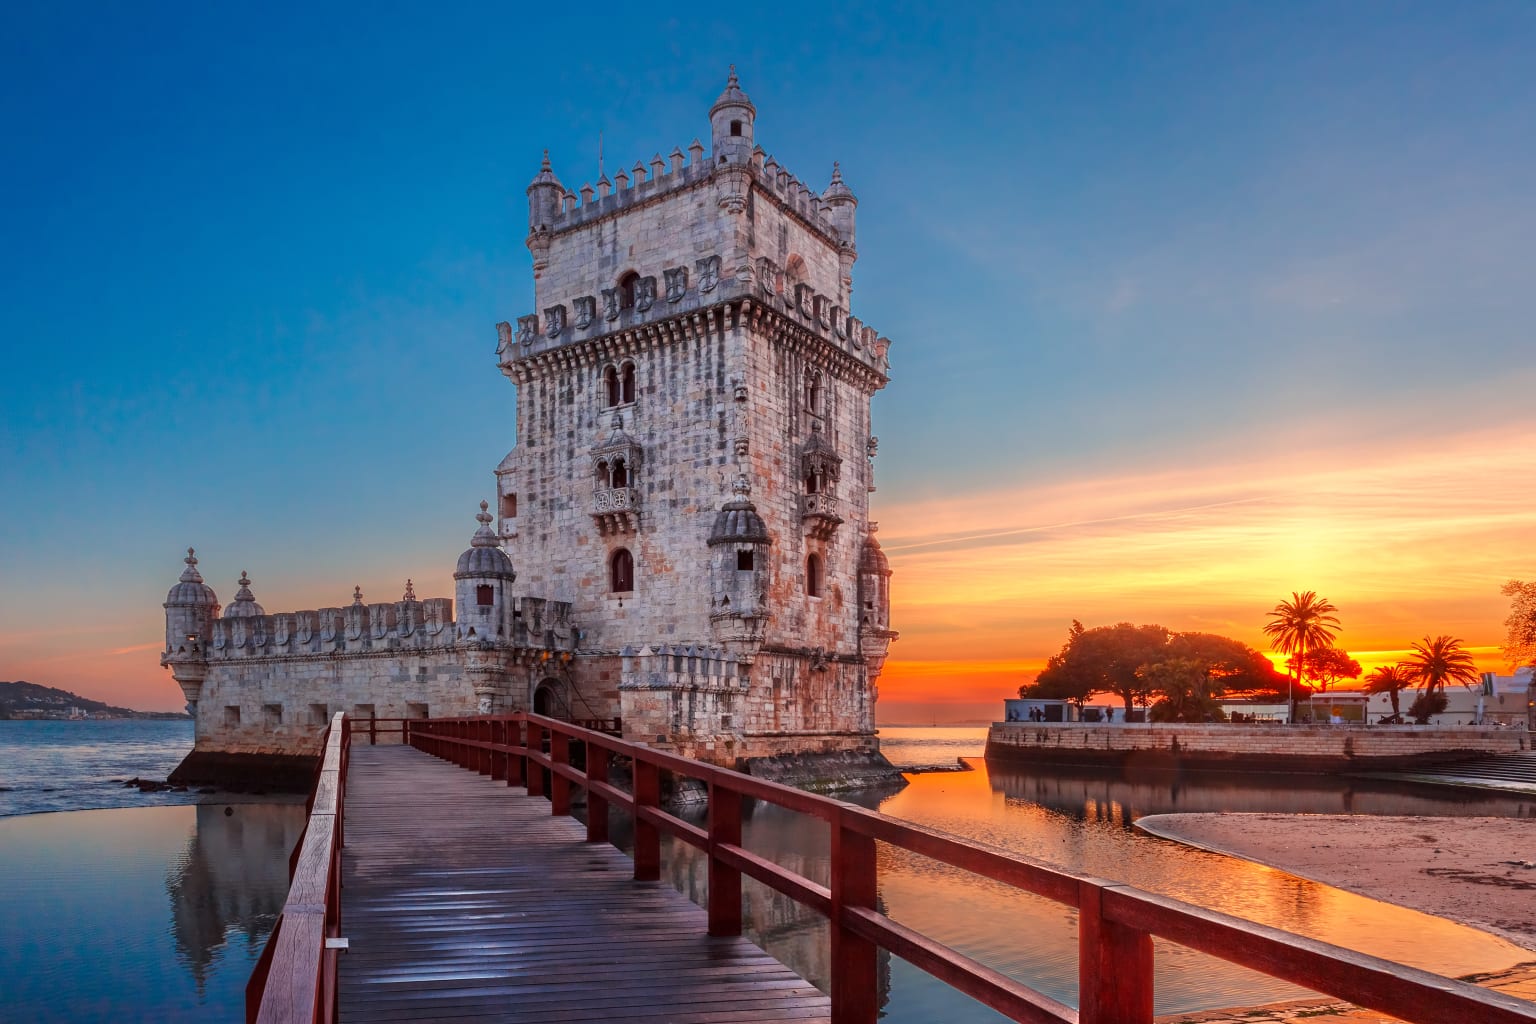 Belém Tower with a sunset in the background.